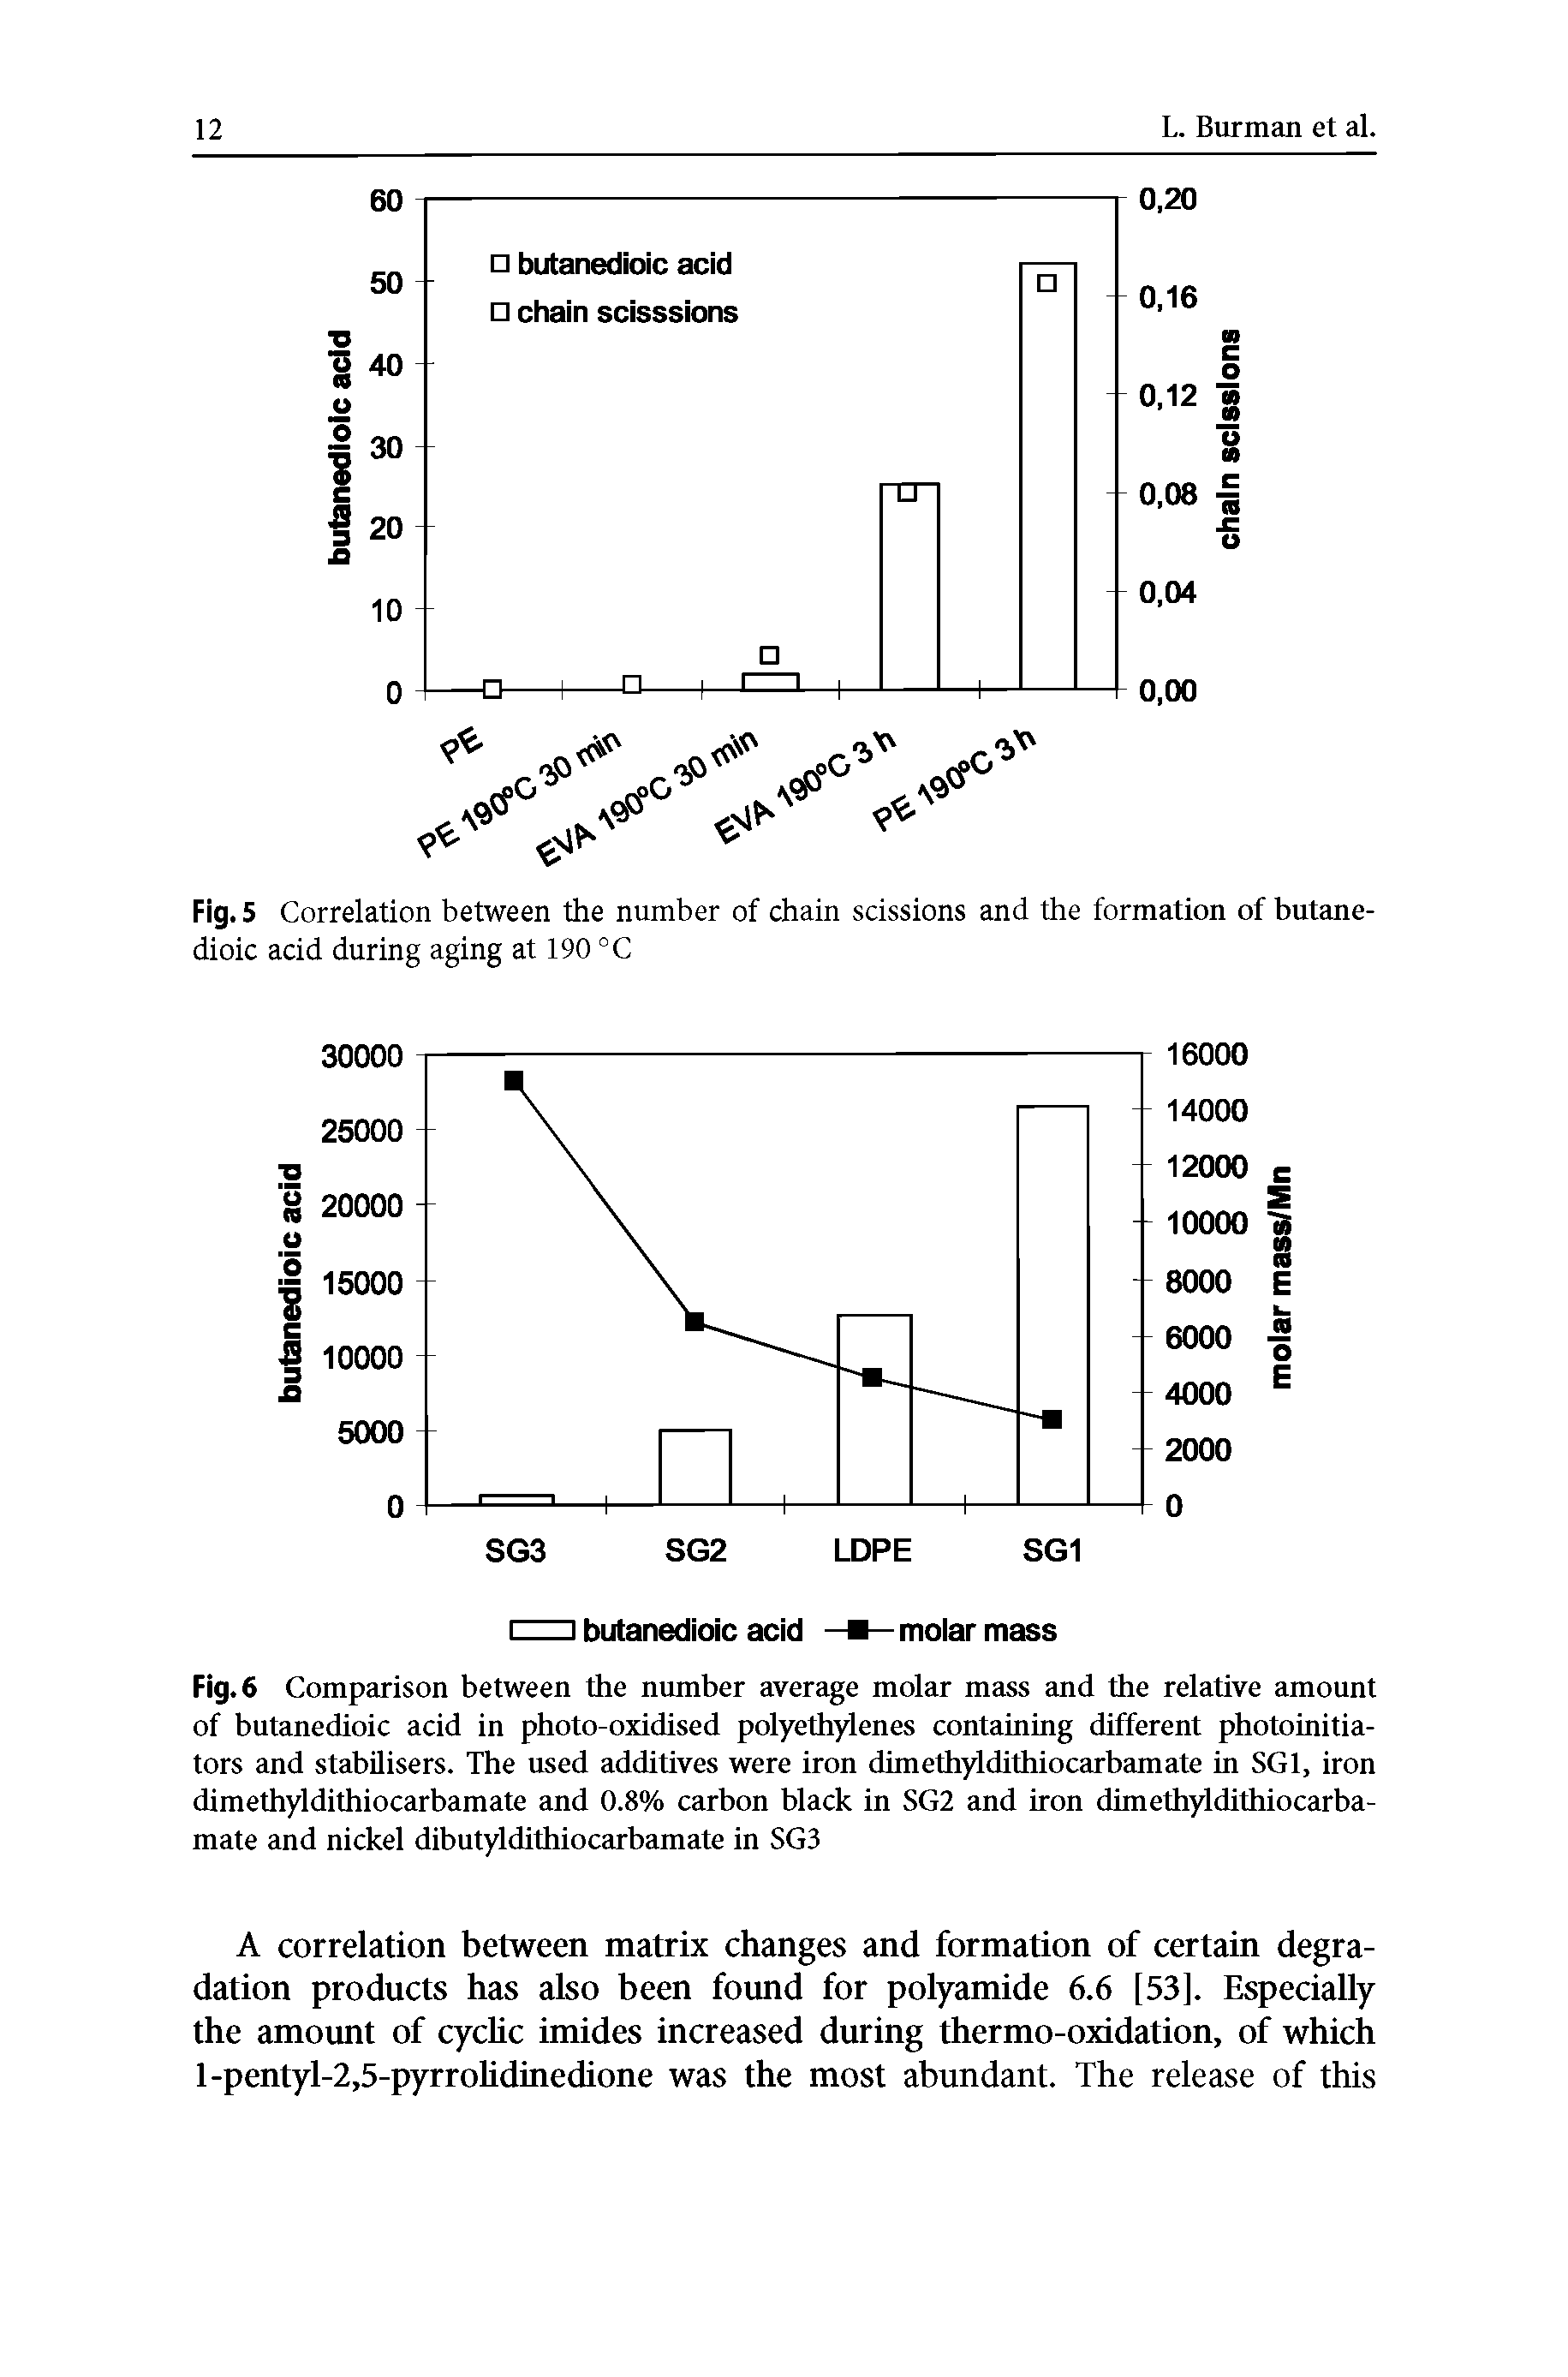 Fig. 6 Comparison between the number average molar mass and the relative amount of butanedioic acid in photo-oxidised polyethylenes containing different photoinitiators and stabilisers. The used additives were iron dimethyldithiocarbamate in SGI, iron dimethyldithiocarbamate and 0.8% carbon black in SG2 and iron dimethyldithiocarbamate and nickel dibutyldithiocarbamate in SG3...